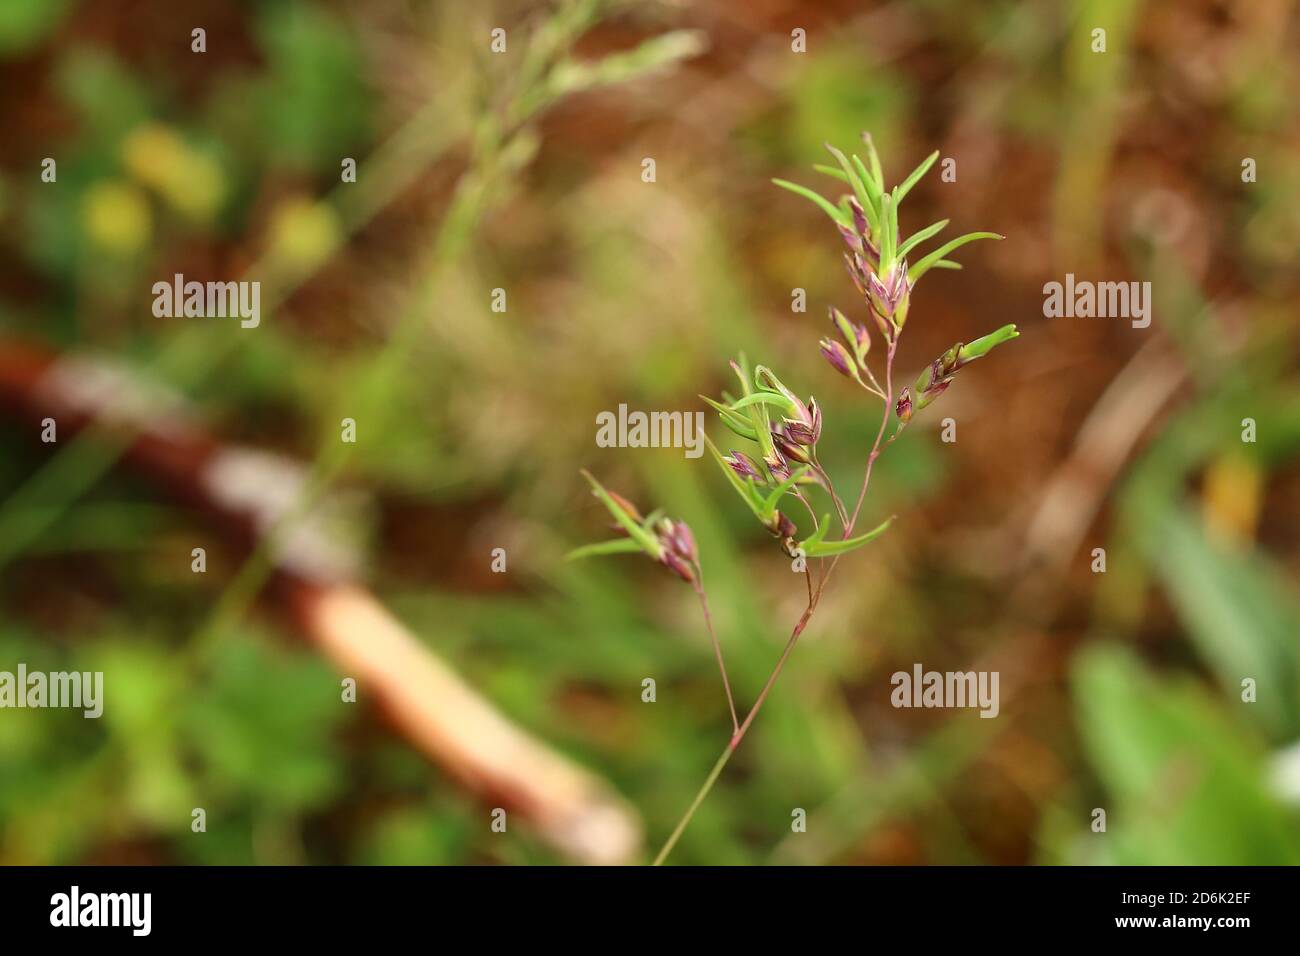 Young shoots of Poa bulbosa, bulbous meadow-grass, growing from the spike. Stock Photo